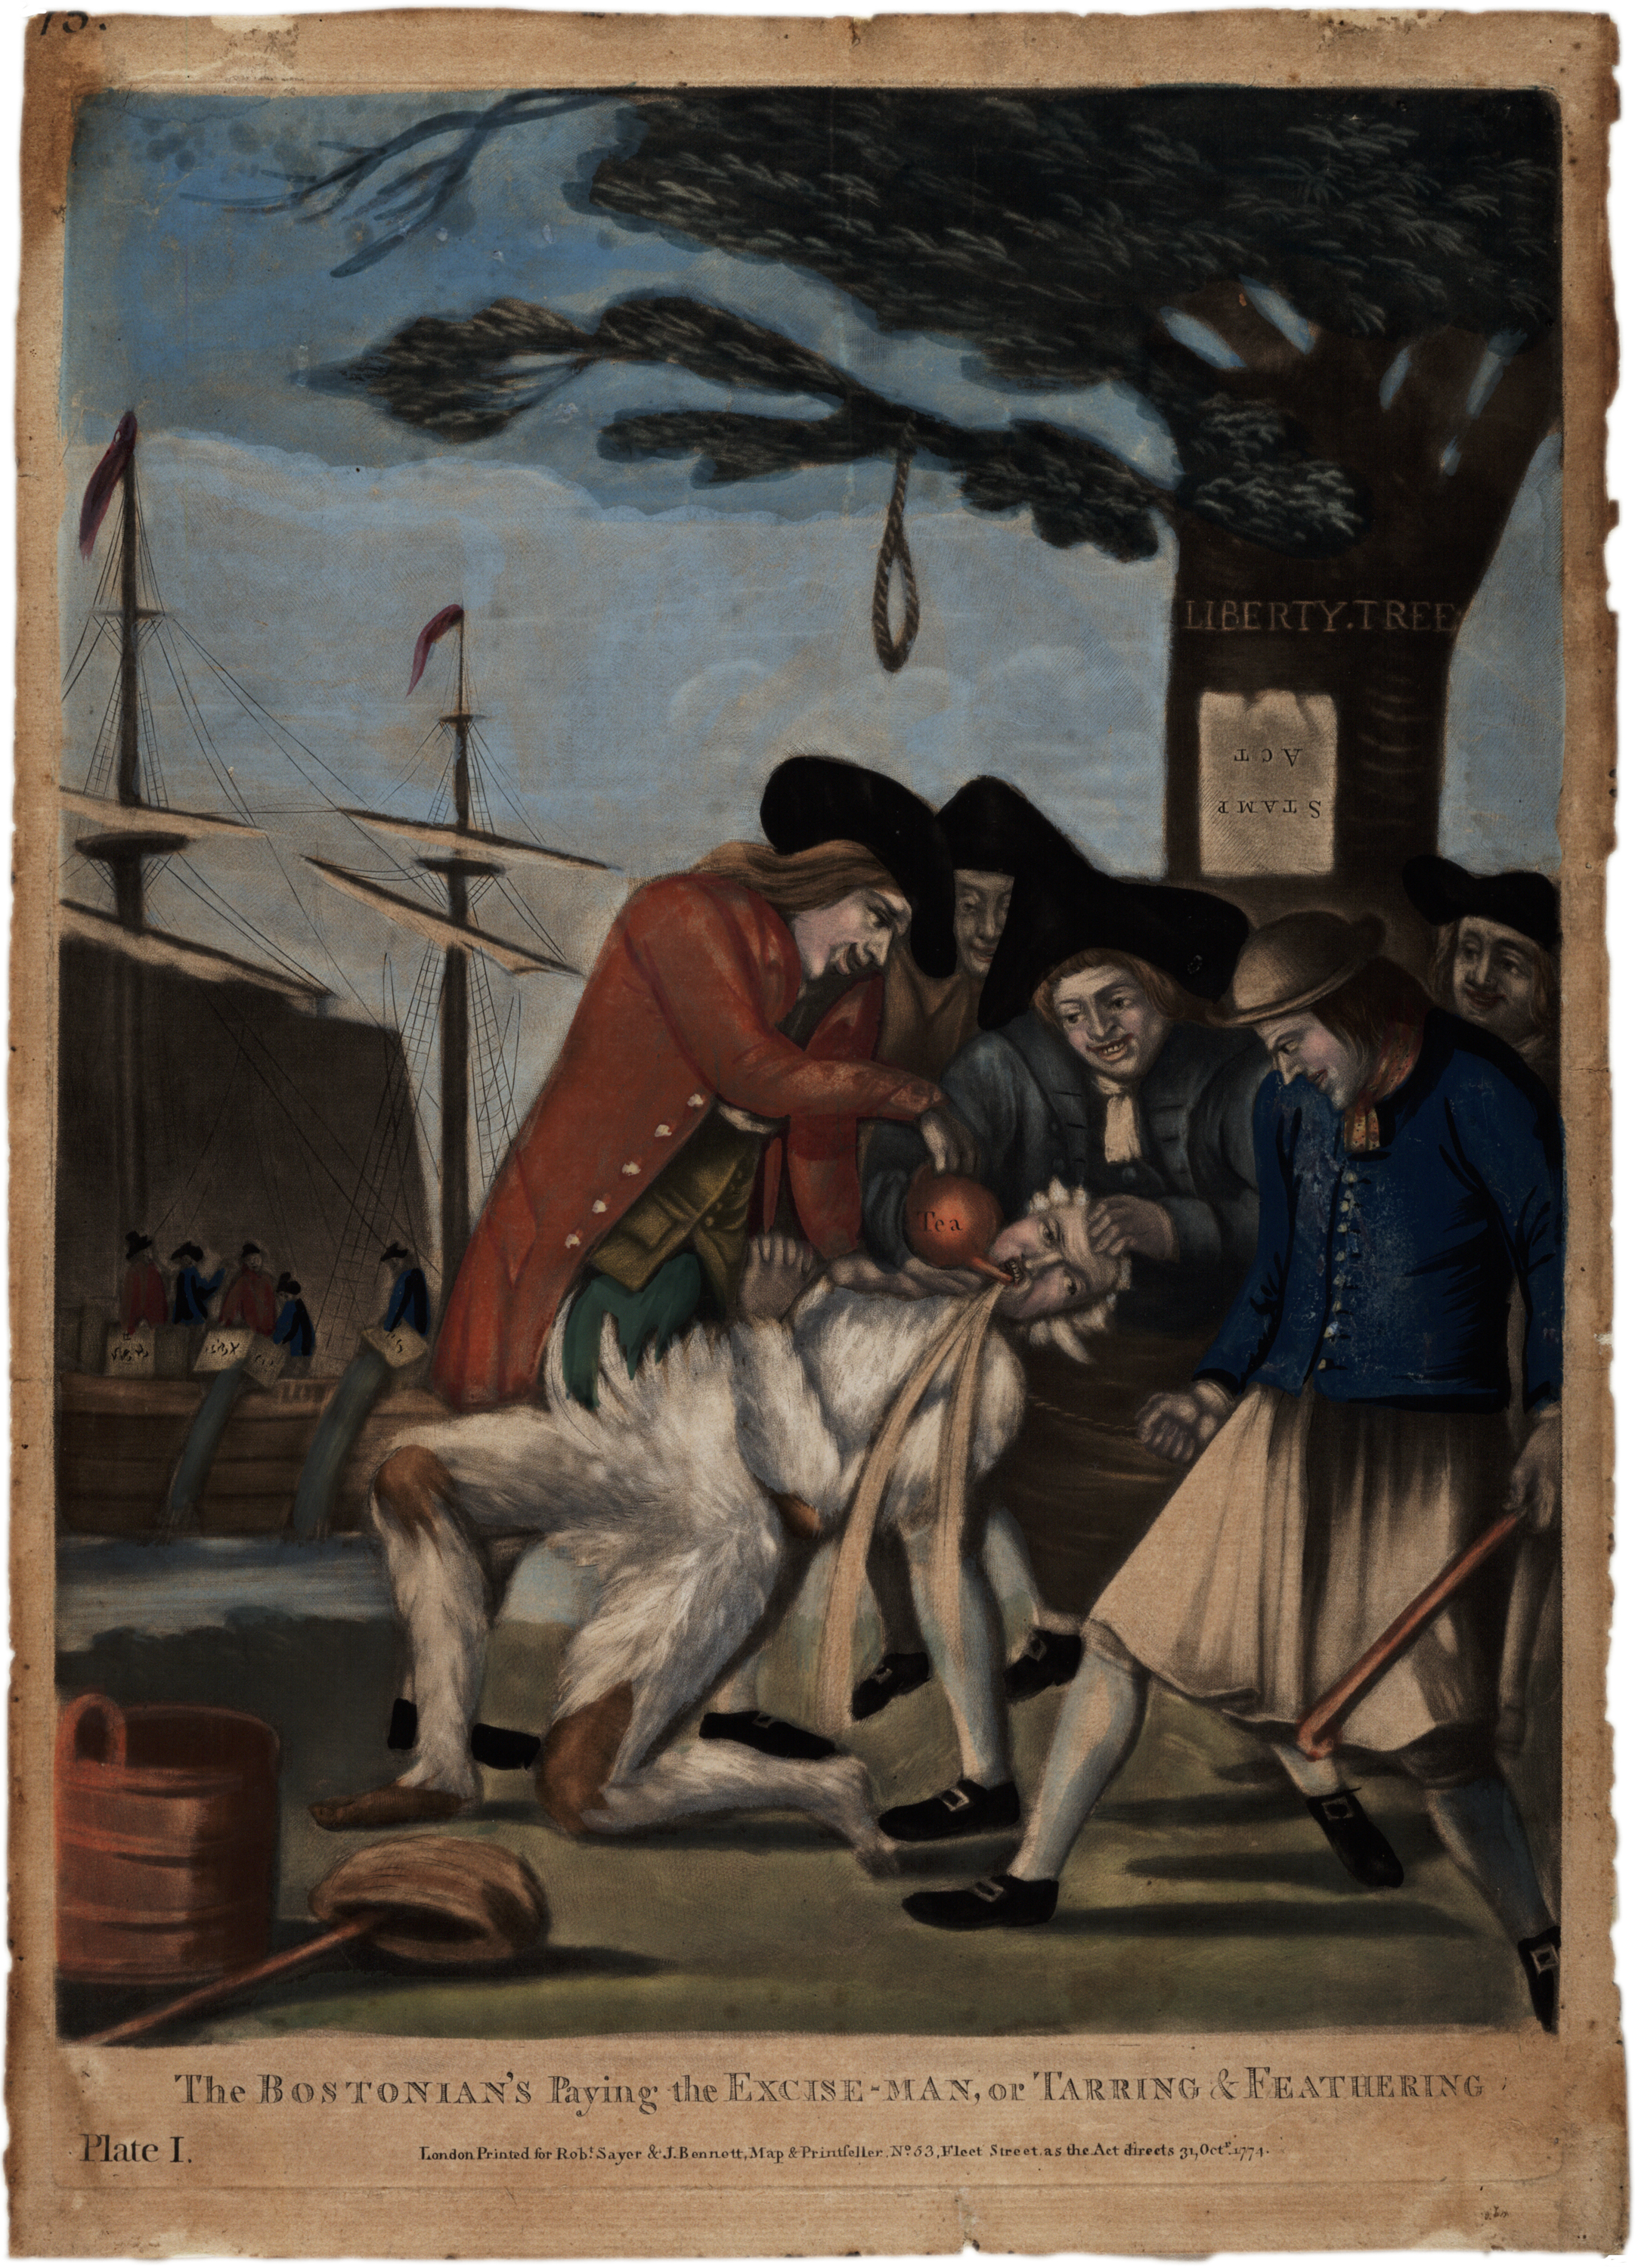 Bostonian's Paying the Excise-man, by Philip Dawe. This print shows the Boston Tea Party in the background, a "Liberty Tree" with a paper "Stamp Act" affixed upside-down, with five unsavory Bostonians forcibly pouring a pot of tea into the mouth of a tarred and feathered tea tax collector.